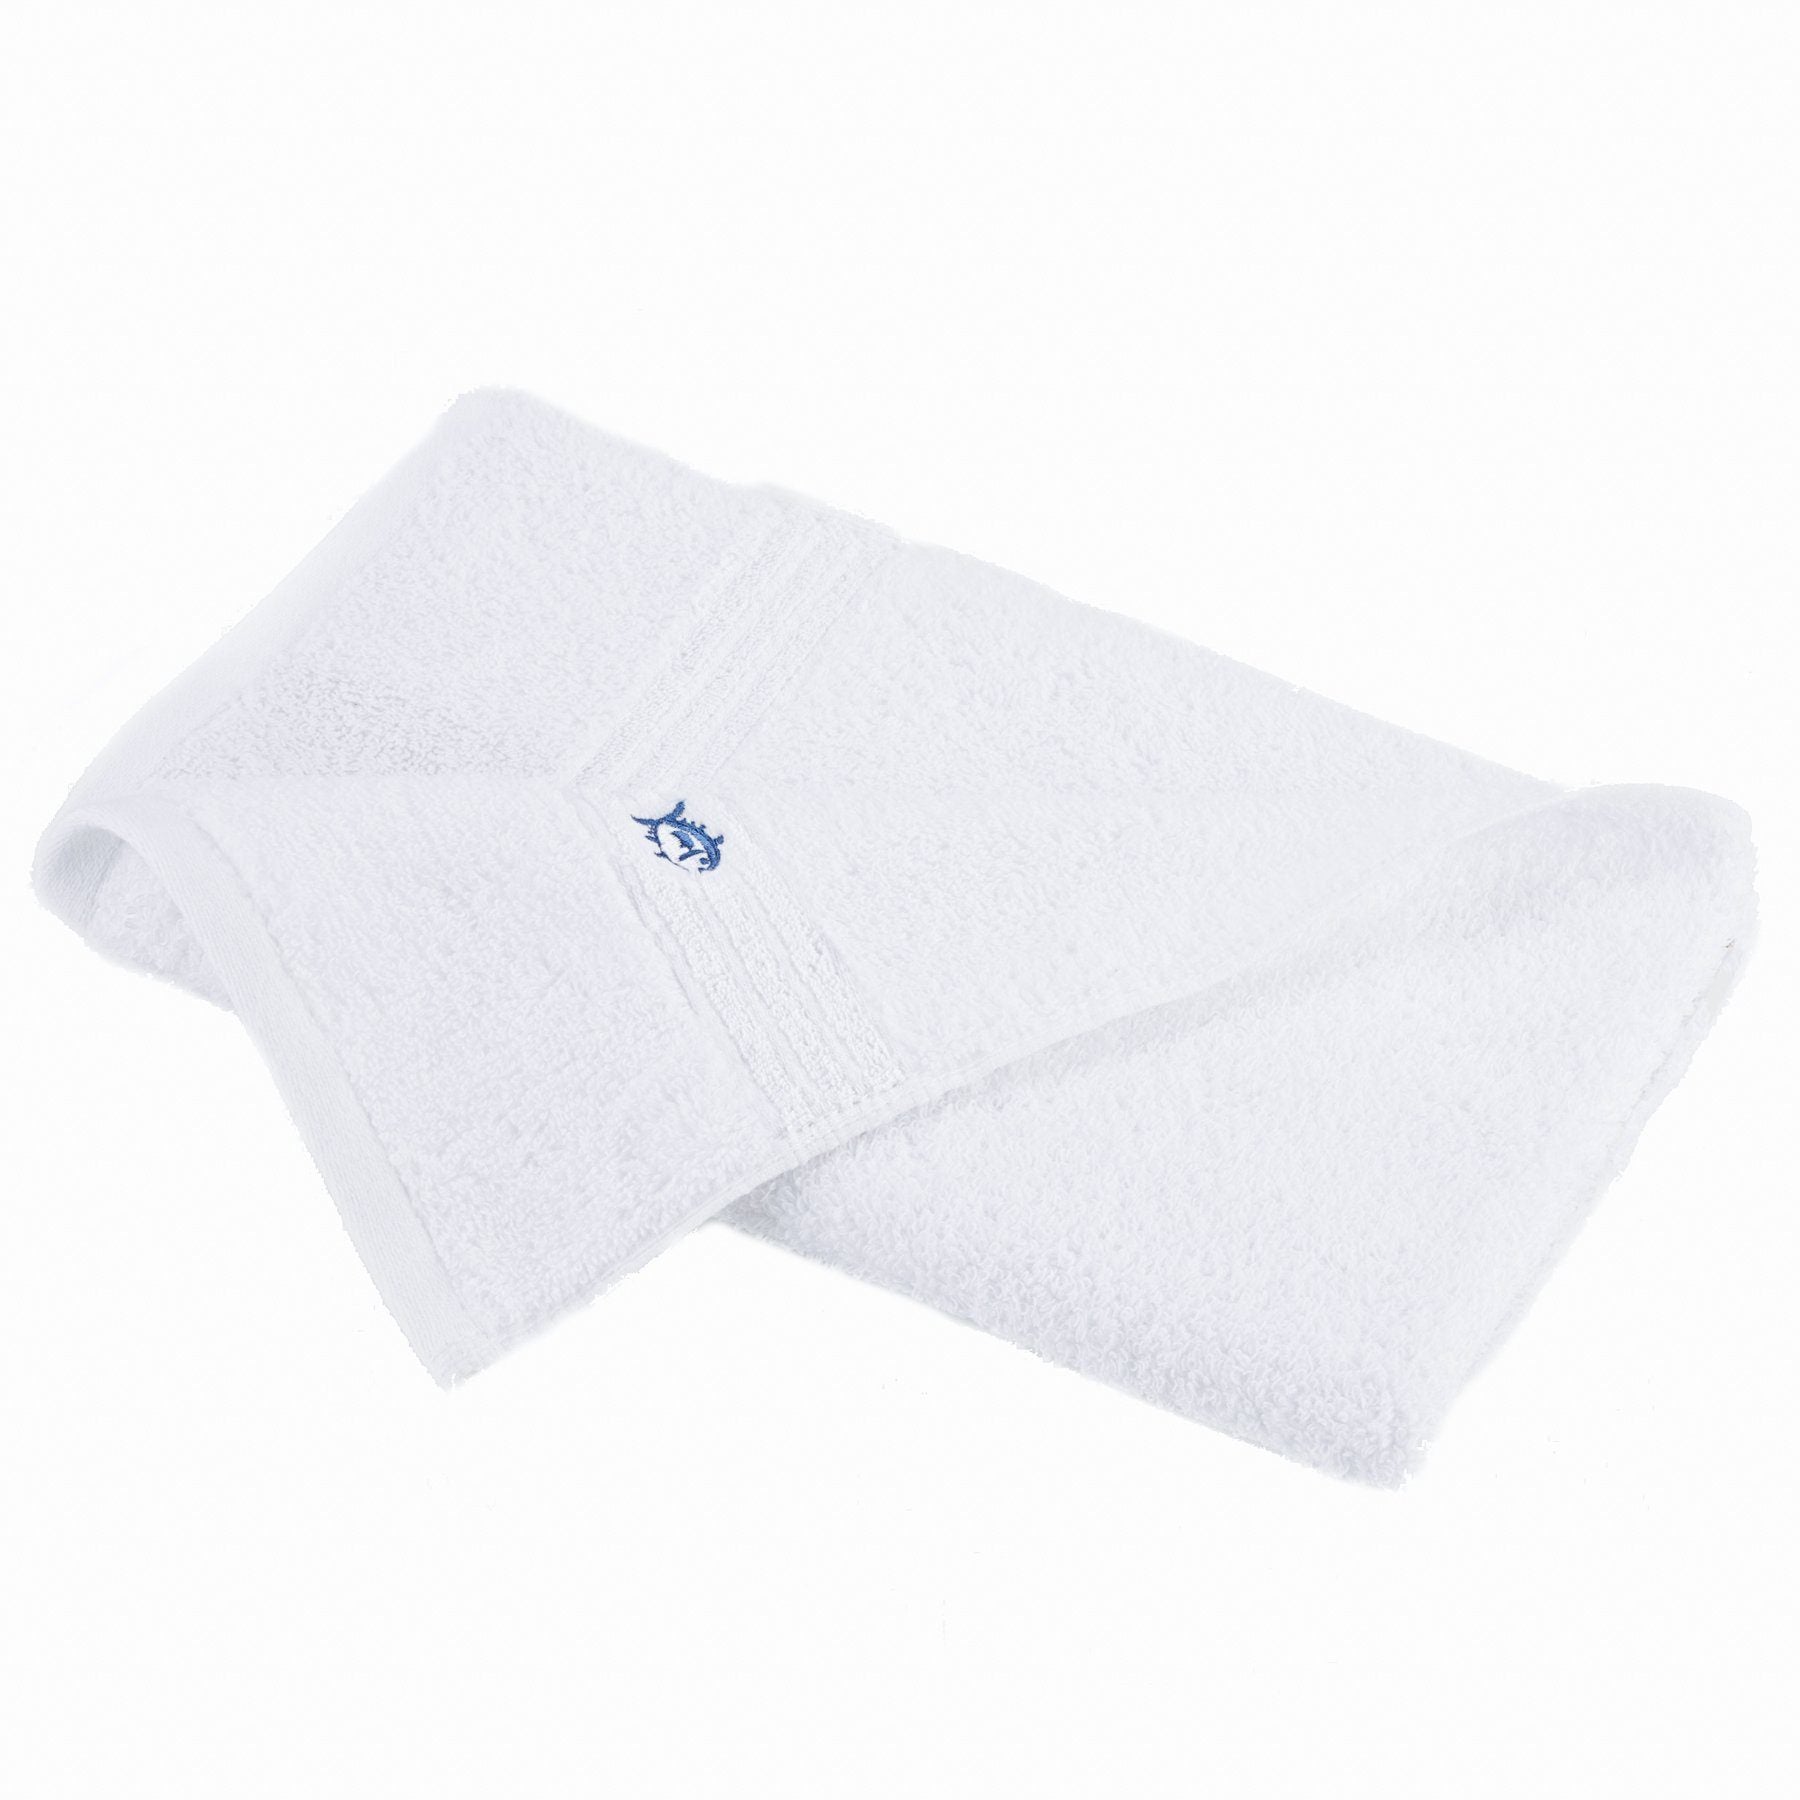 Southern Tide Performance 5.0 Towel